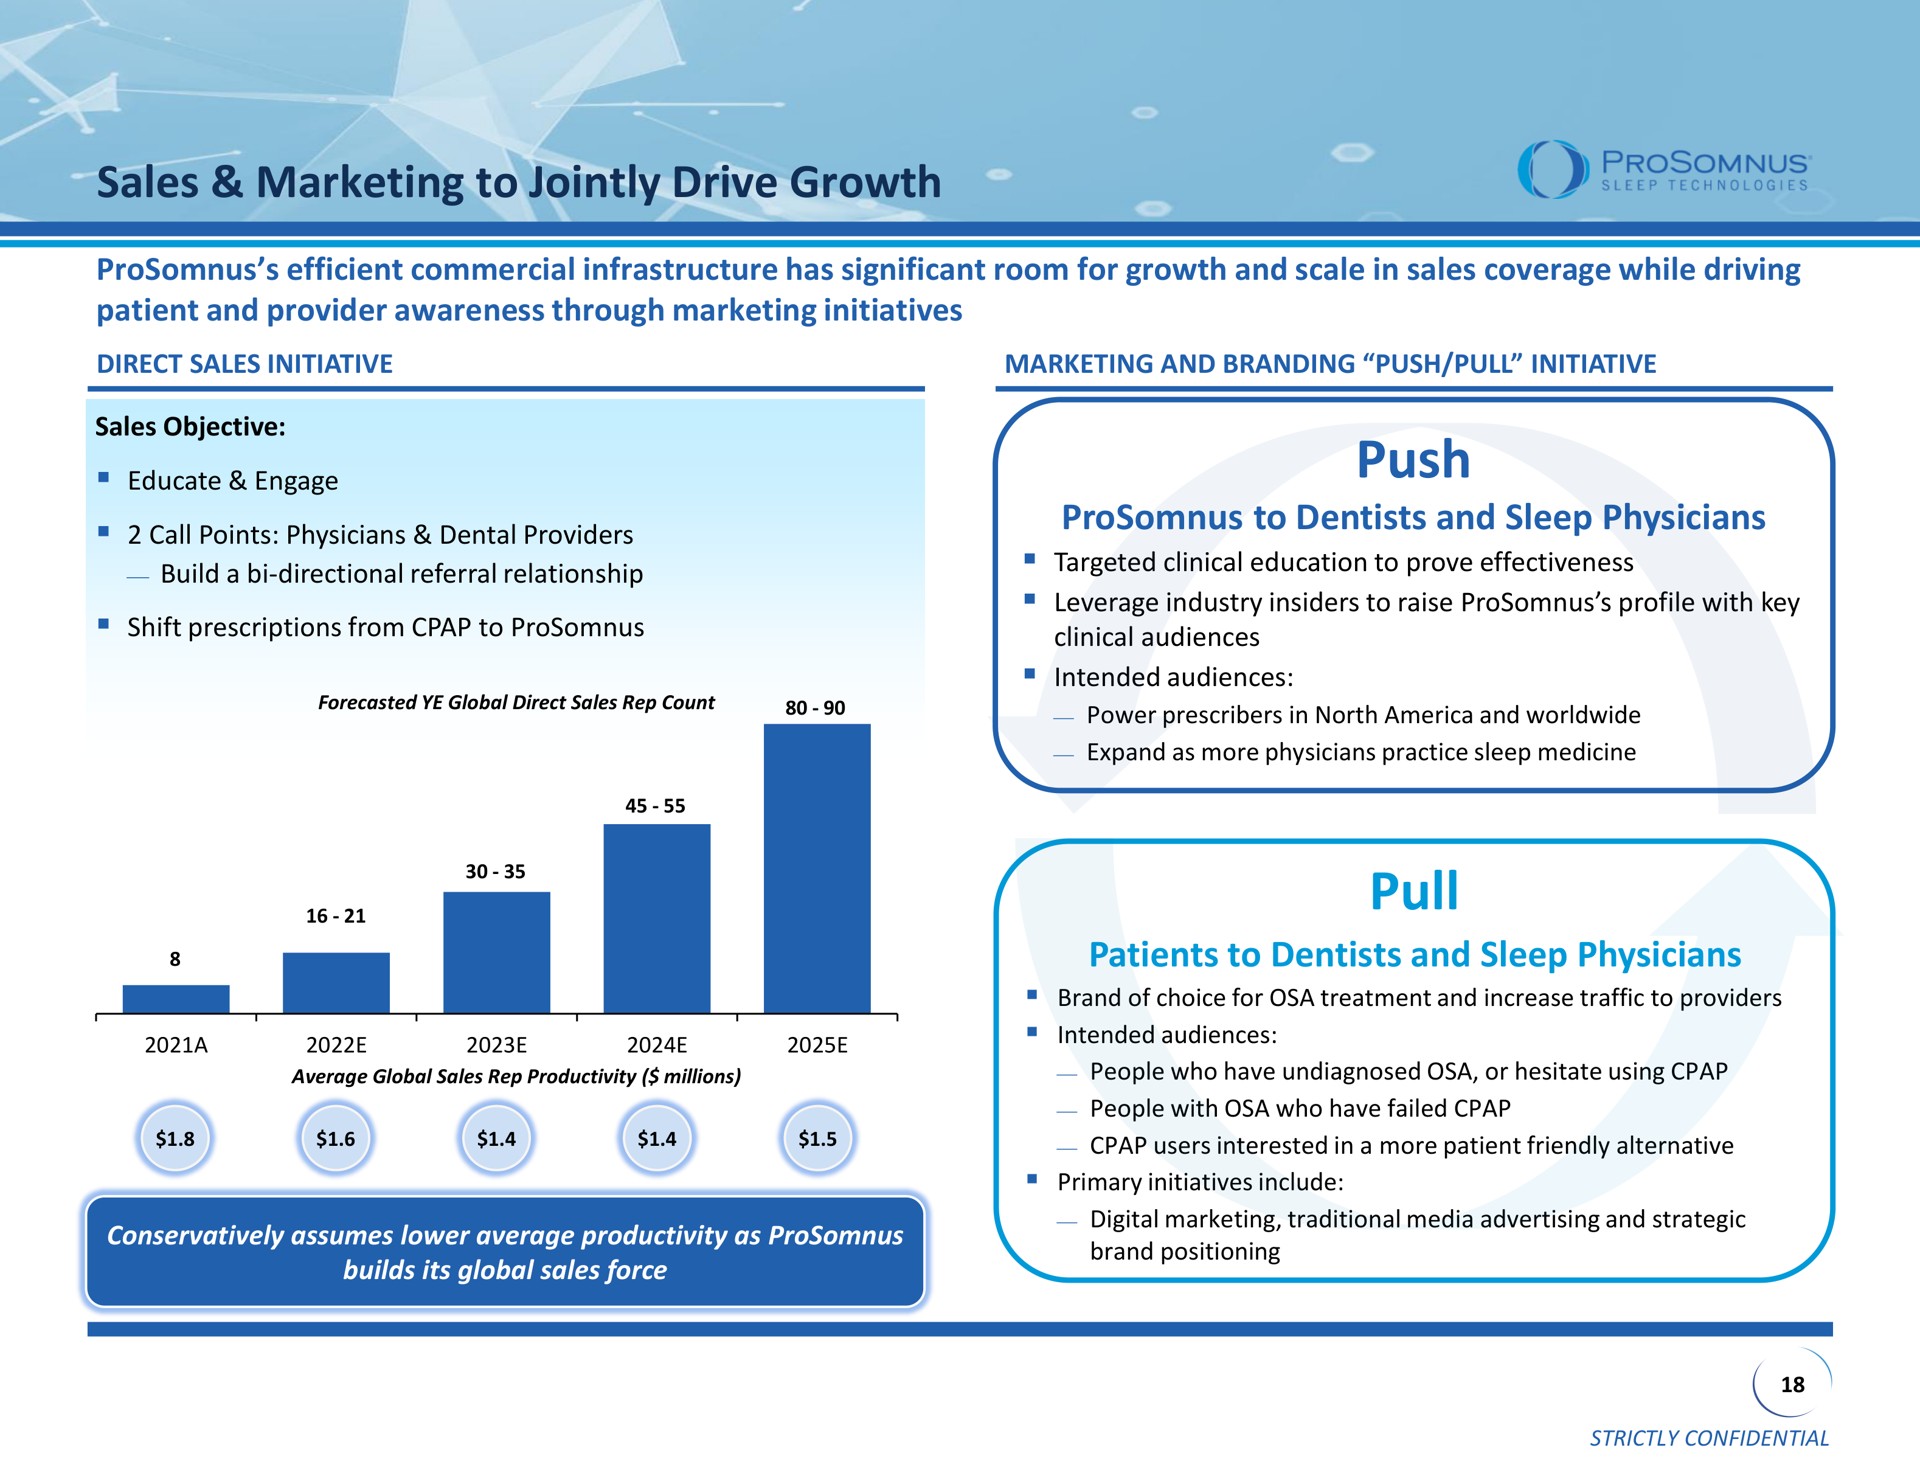 sales marketing to jointly drive growth push to dentists and sleep physicians pull patients to dentists and sleep physicians a intended audiences as | ProSomnus